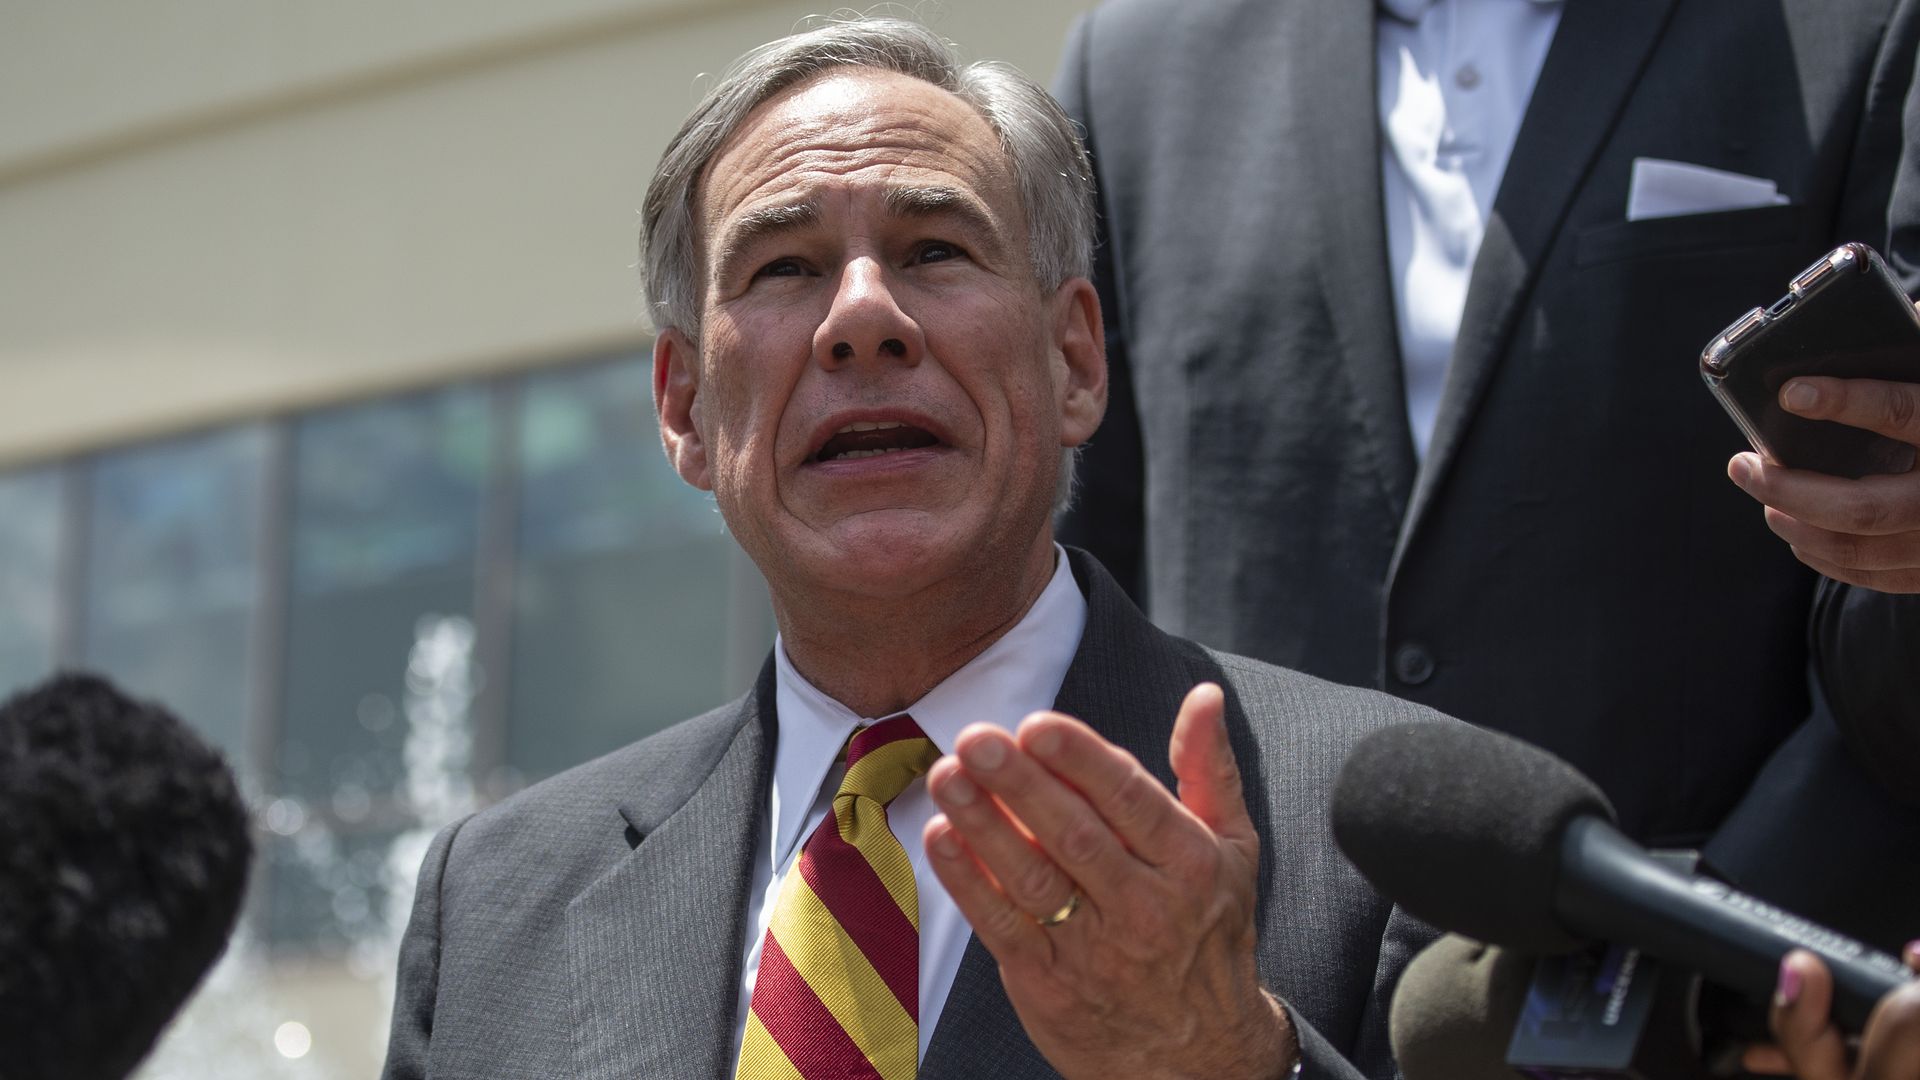 Texas Governor in a suit and tie speaks to reporters 